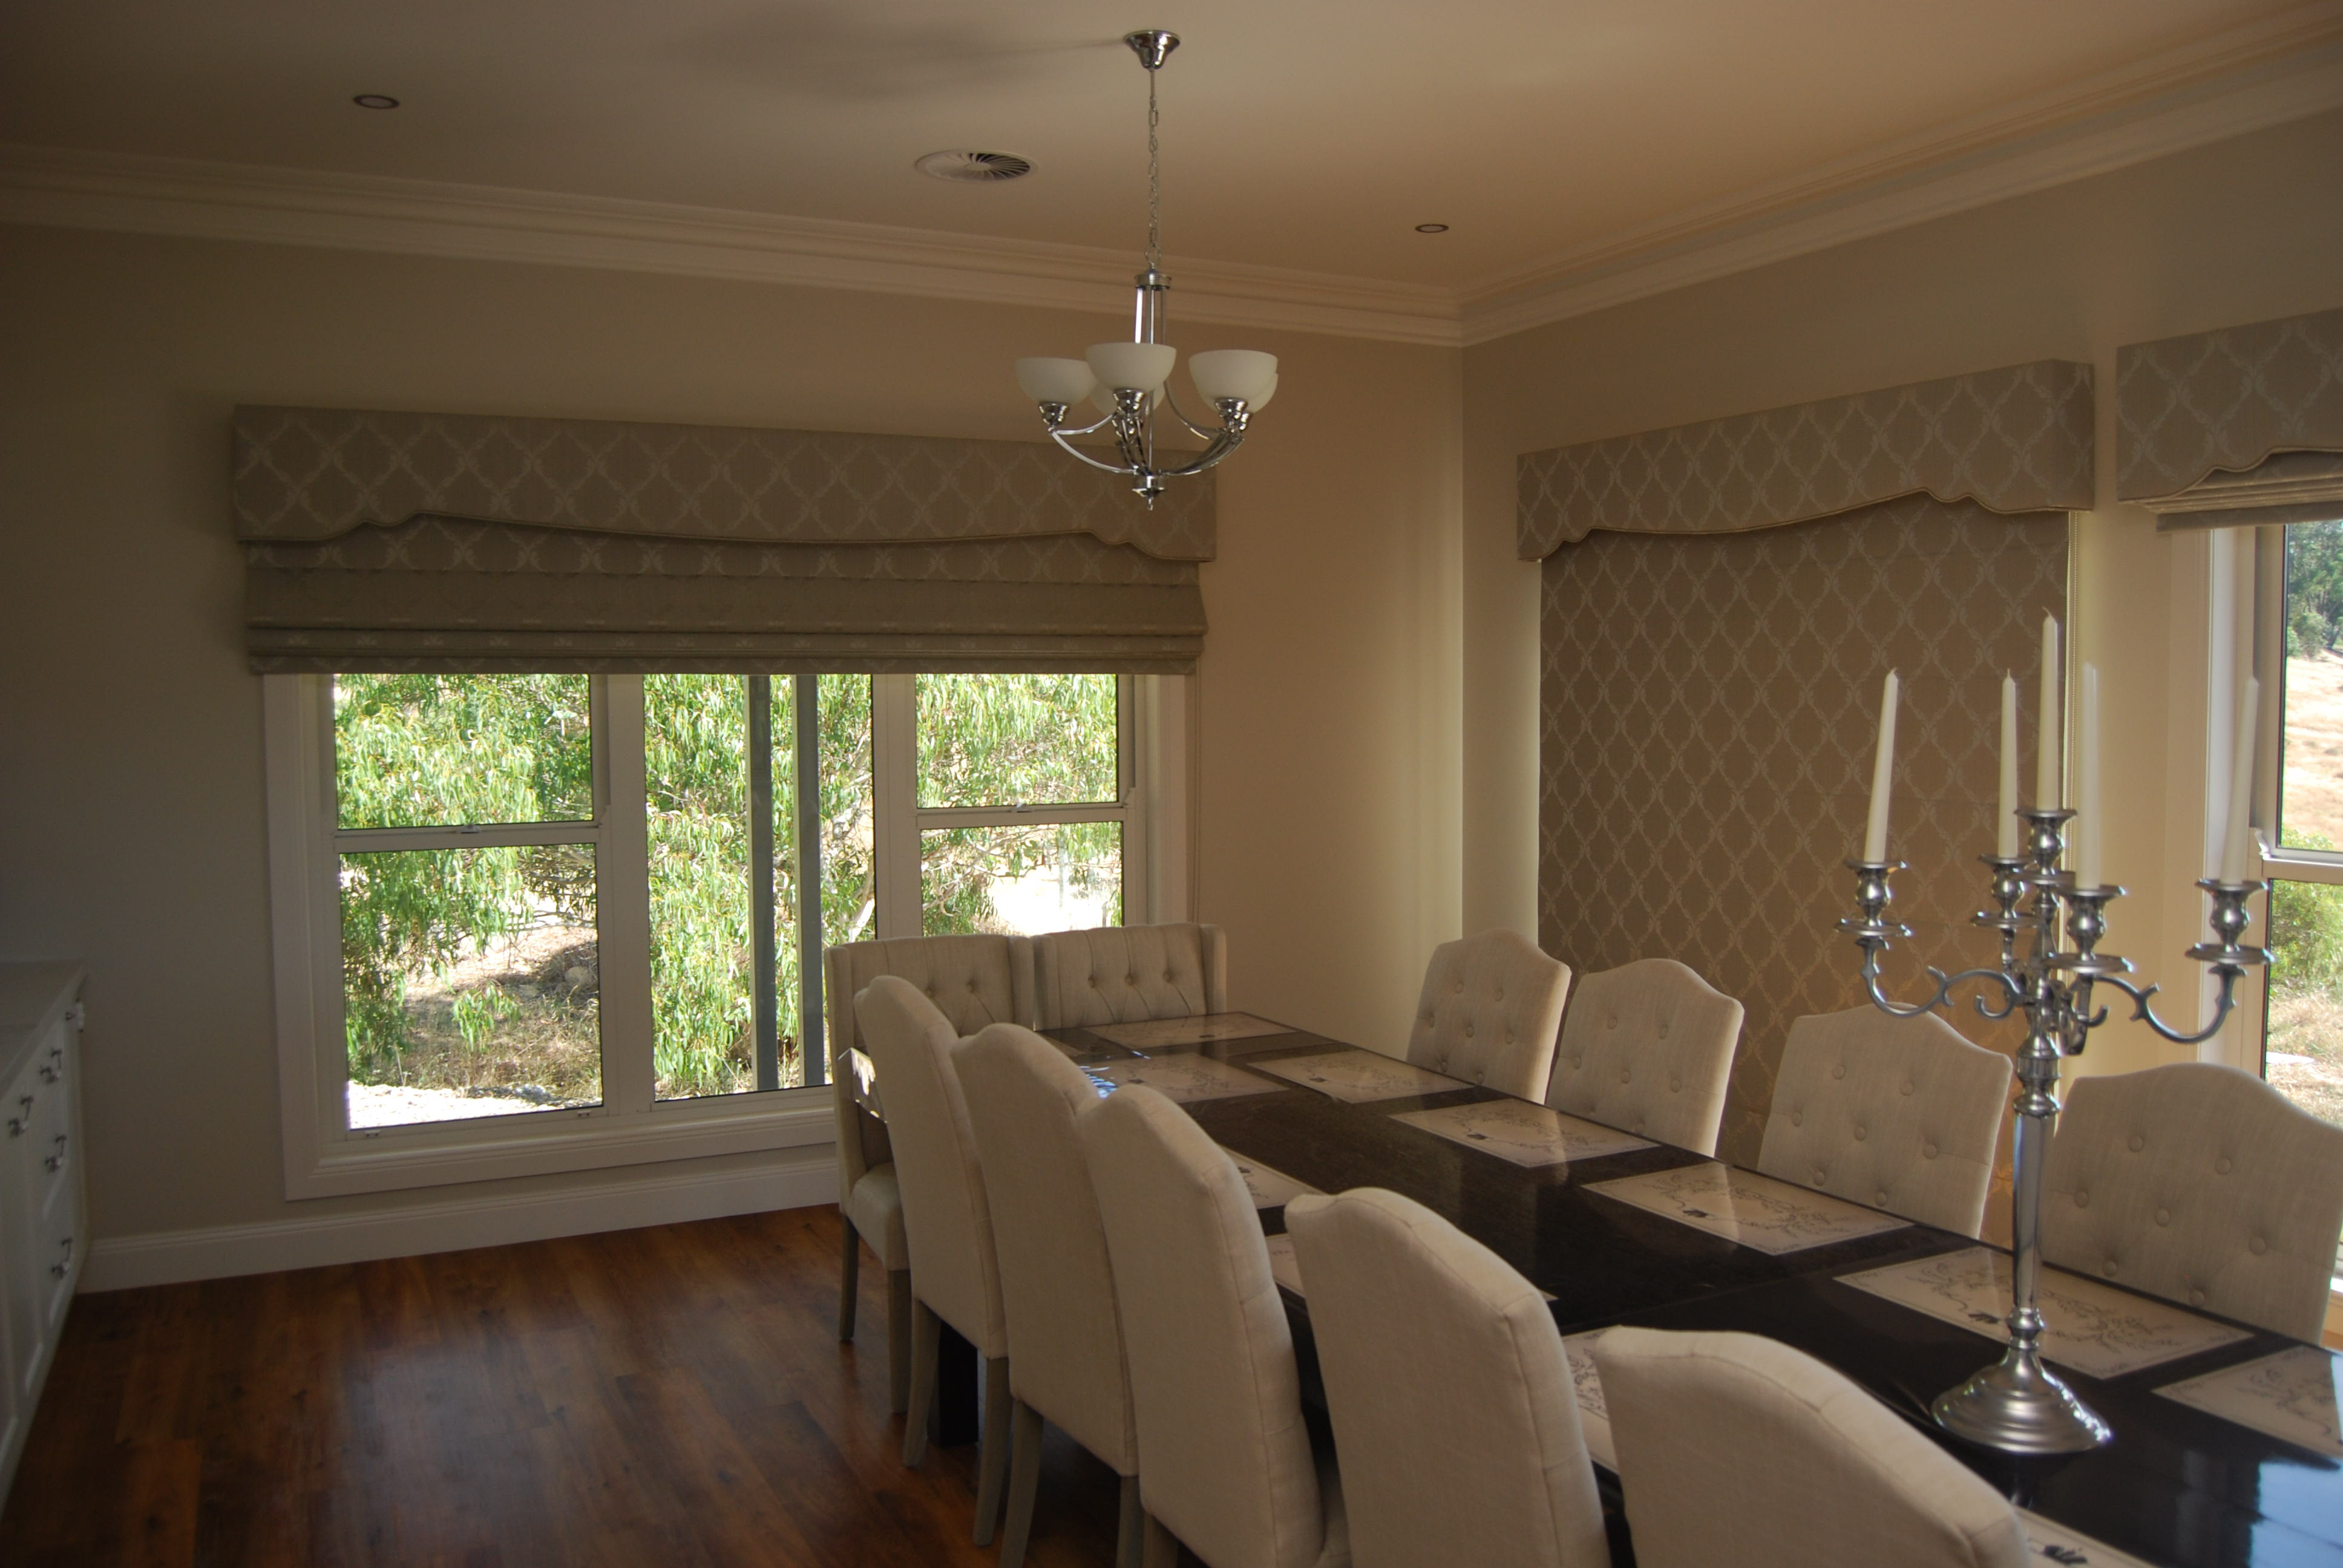 Soft Roman Blinds with Pelmets in Dining Room_1.JPG